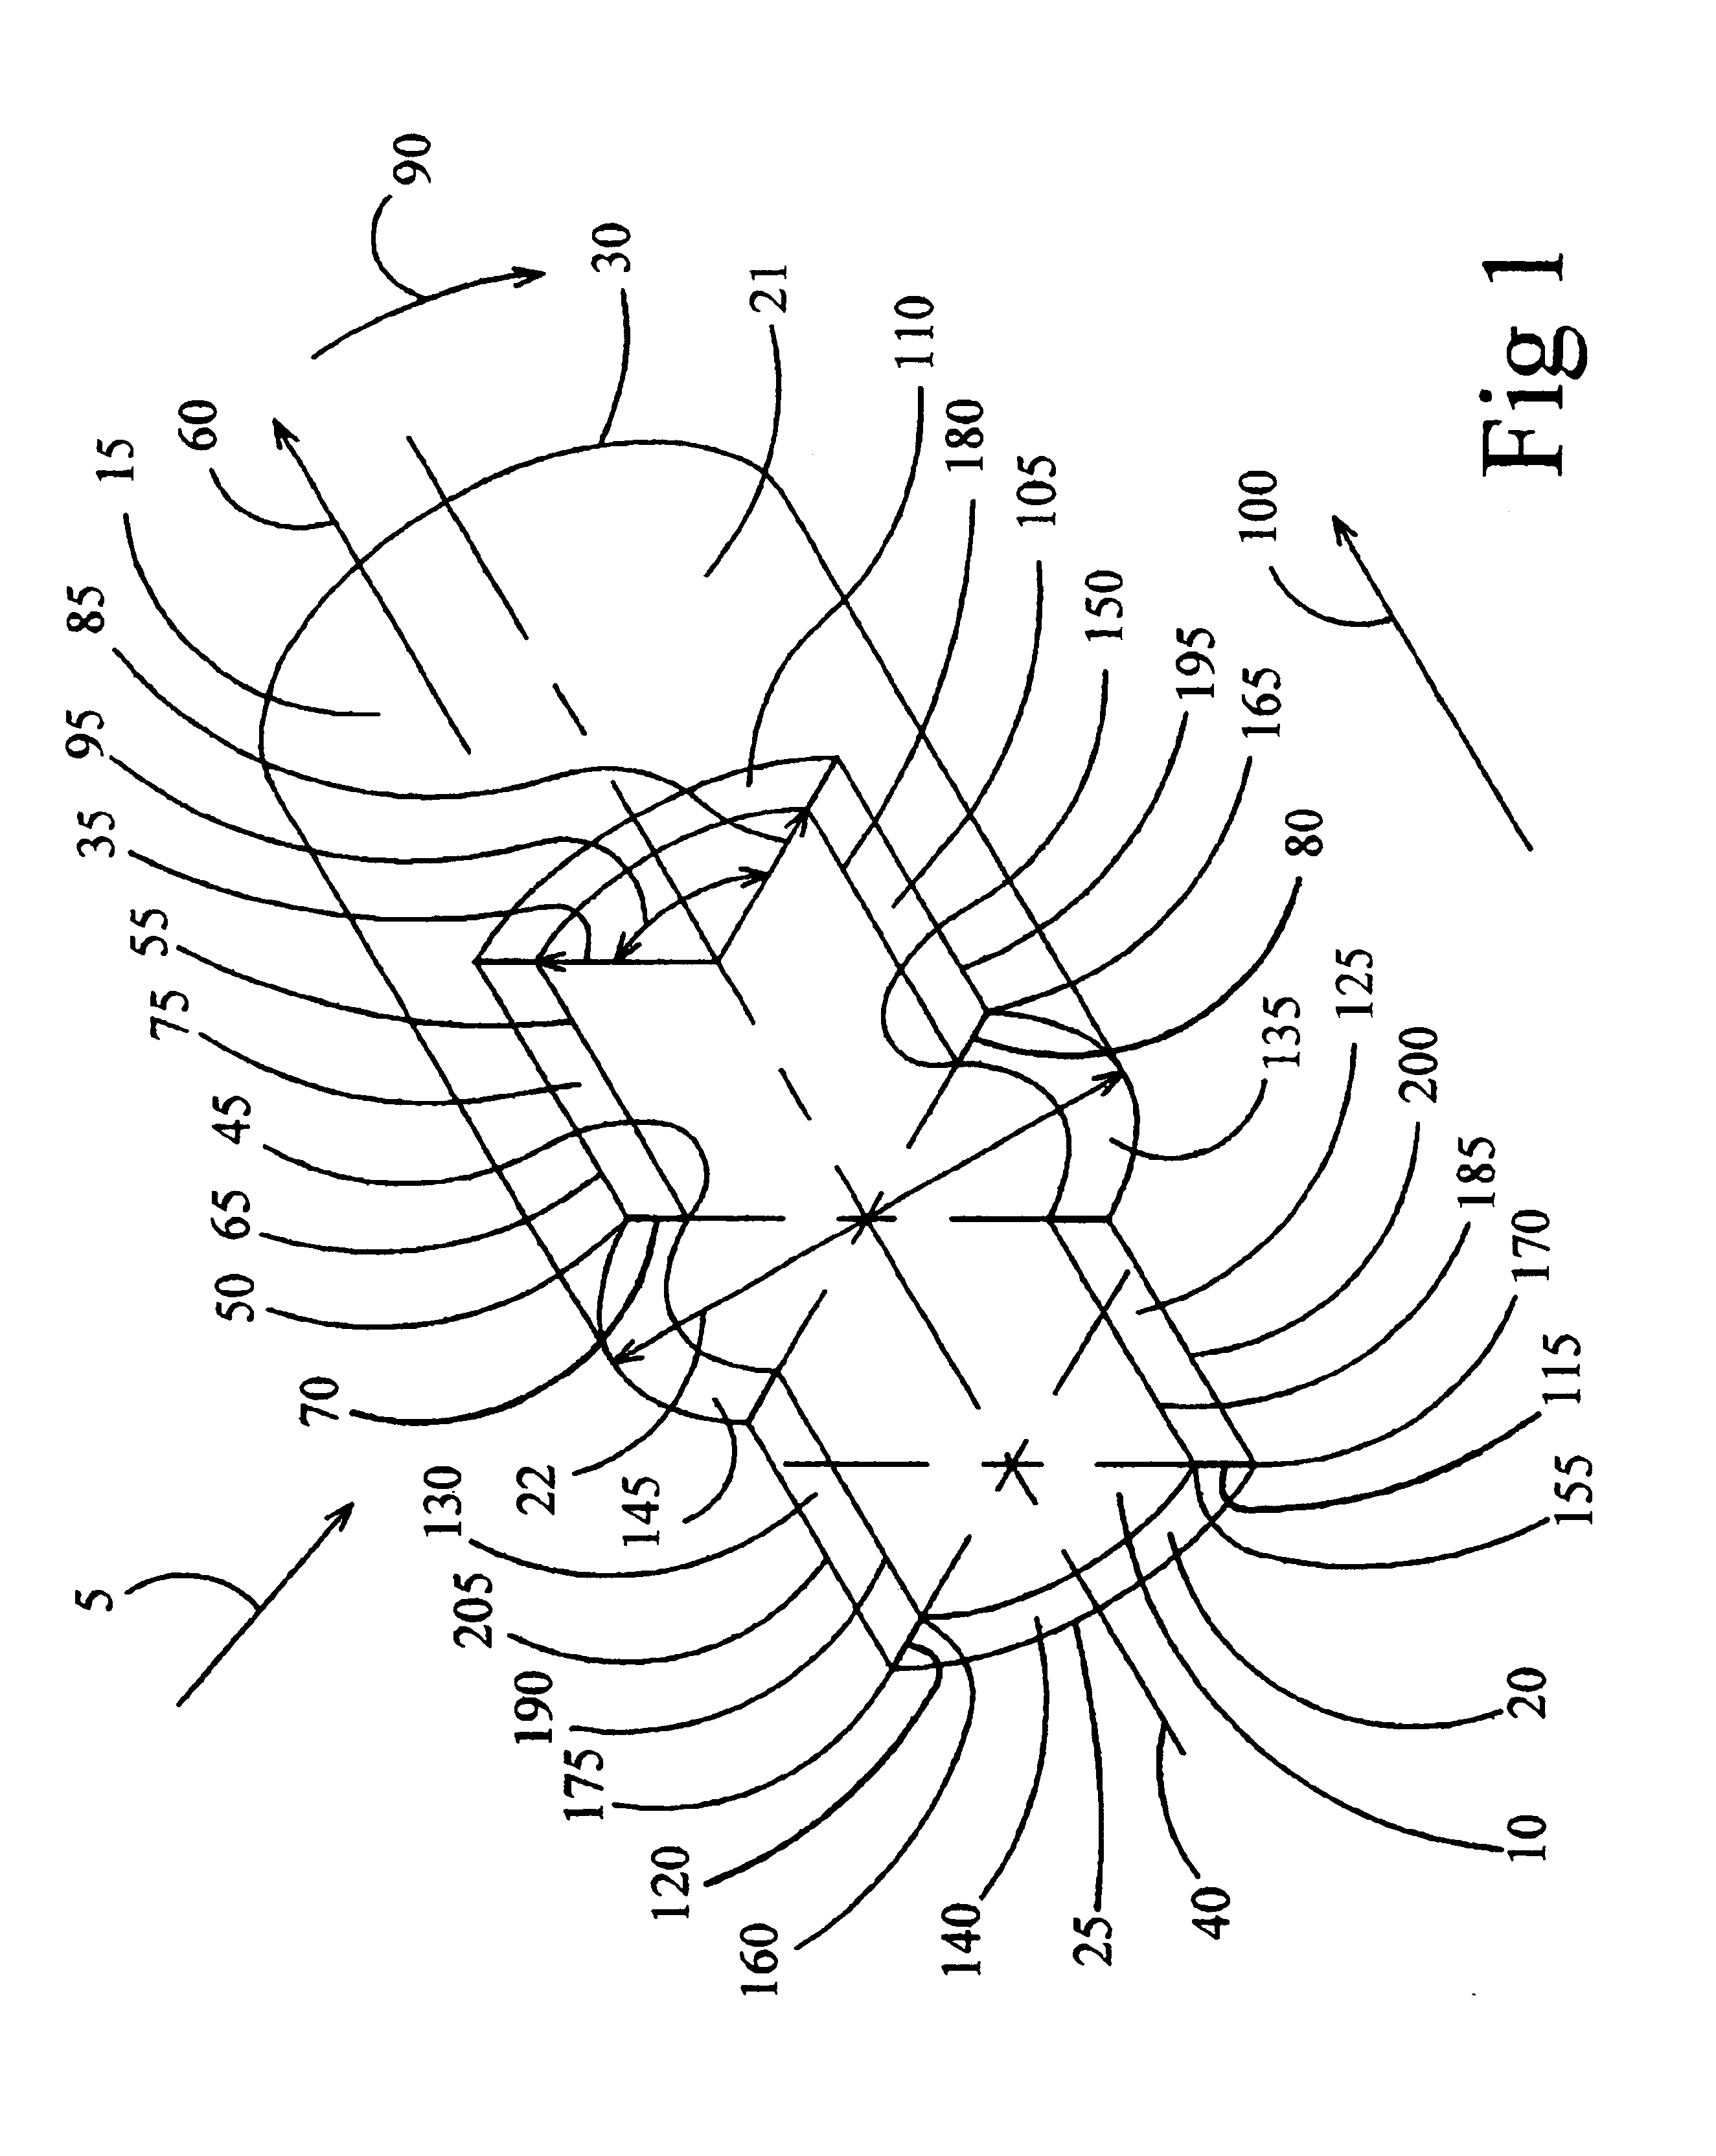 In situ venous valve device and method of formation